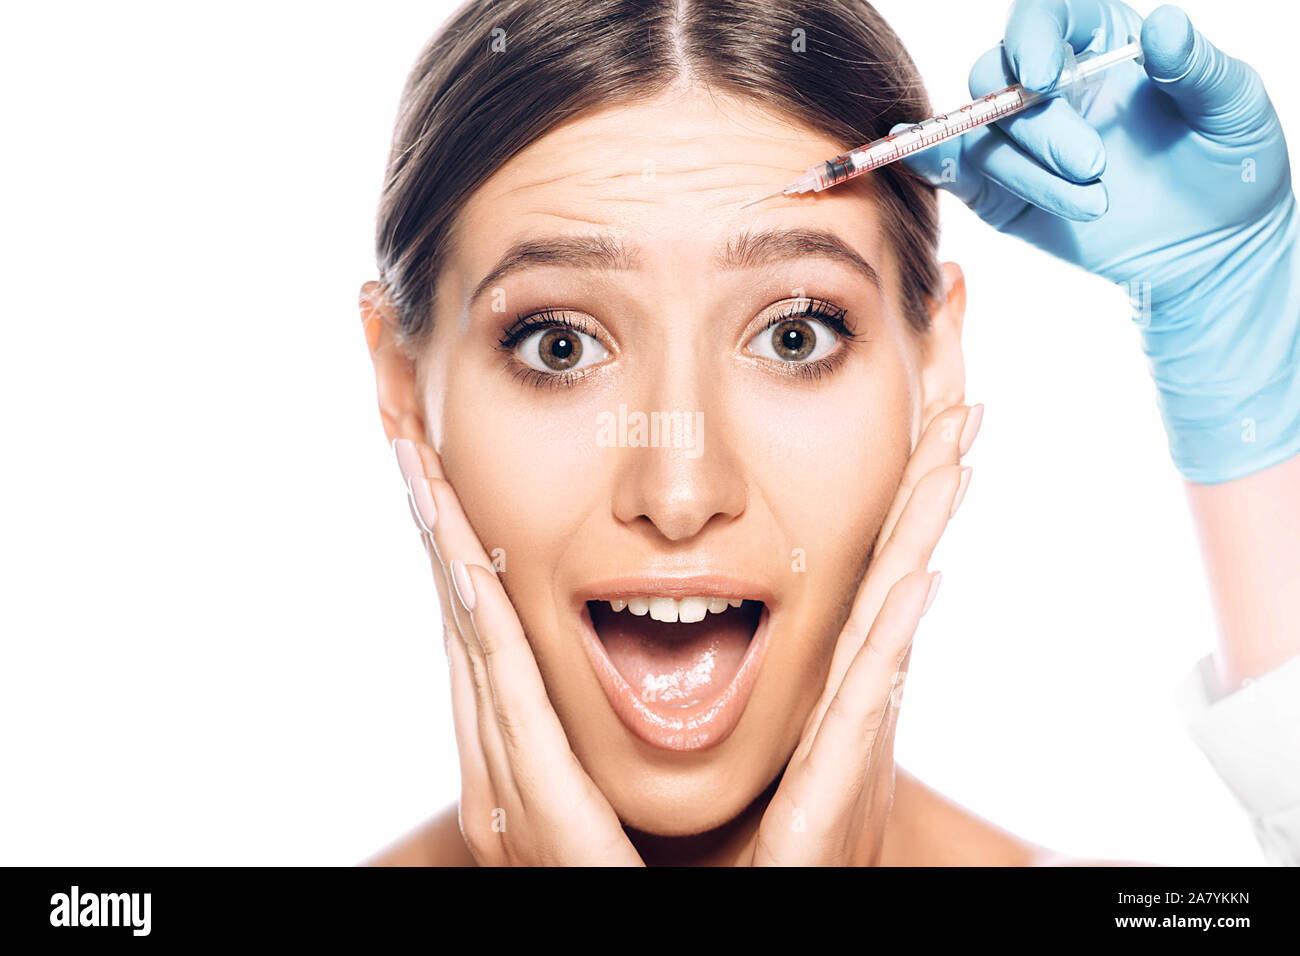 Woman with wrinkles on forehead shocked looking at camera with open mouth. Beauty injections on face, syringe near female face. Remove wrinkle and Stock Photo